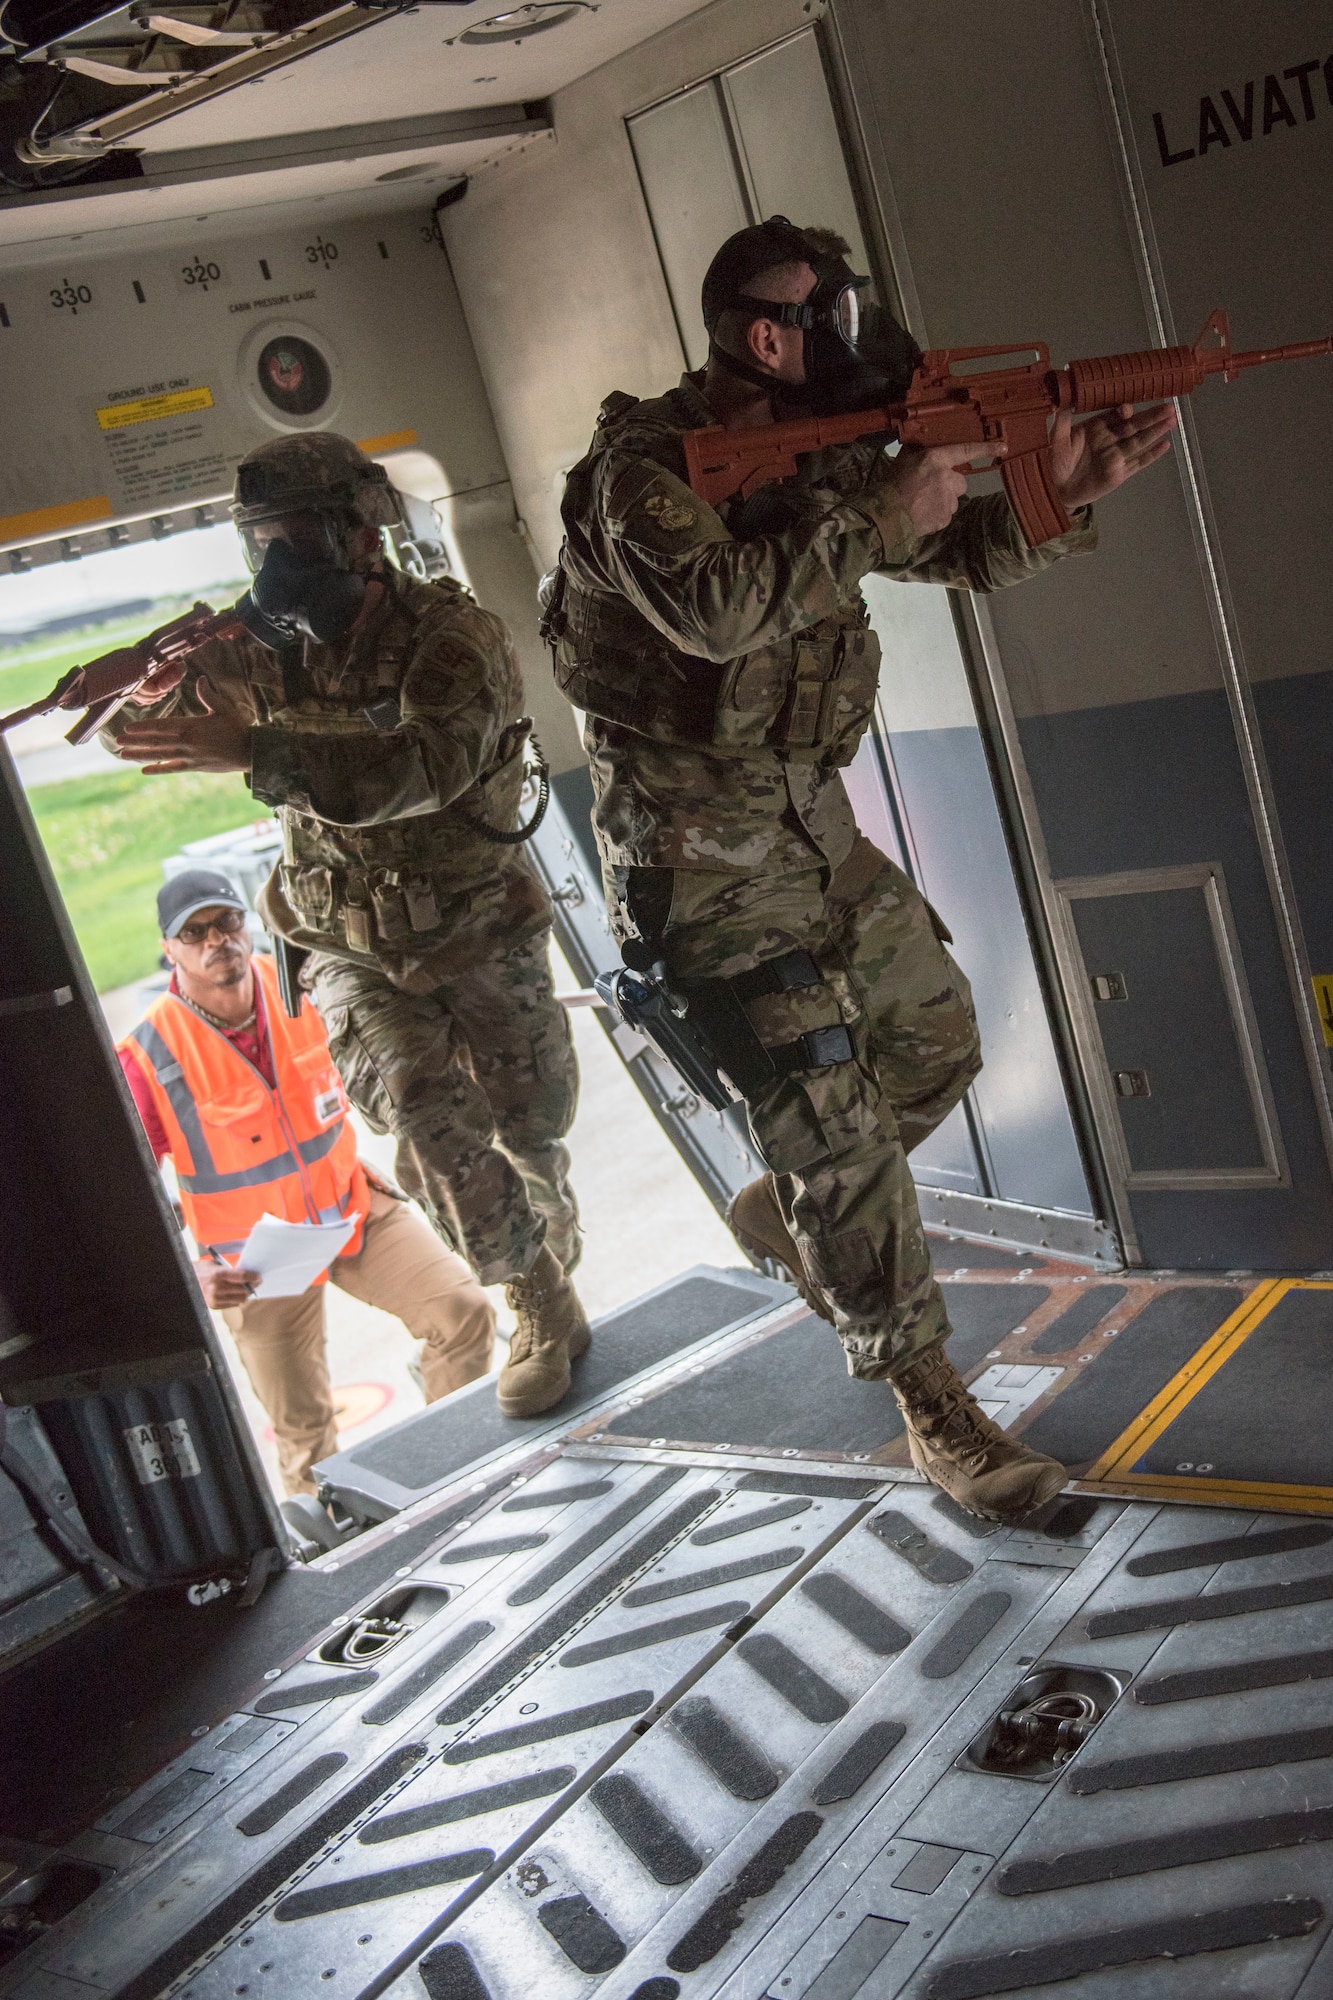 U.S. Air Force Staff Sgt. Bradley Knotts and Staff Sgt. Ryan Jenkins, with the 167th Security Forces Squadron, enter a C-17 Globemaster III aircraft during a Counter CBRN (Chemical, Biological, Radiological, and Nuclear) All-Hazard Management Response, or CAMR, exercise at the 167th Airlift Wing, Shepherd Field, Martinsburg, West Virginia, April 30, 2021. CAMR is a hybrid program of classroom lecture, discussion and tabletop exercises that culminate in a full scale emergency response exercise.